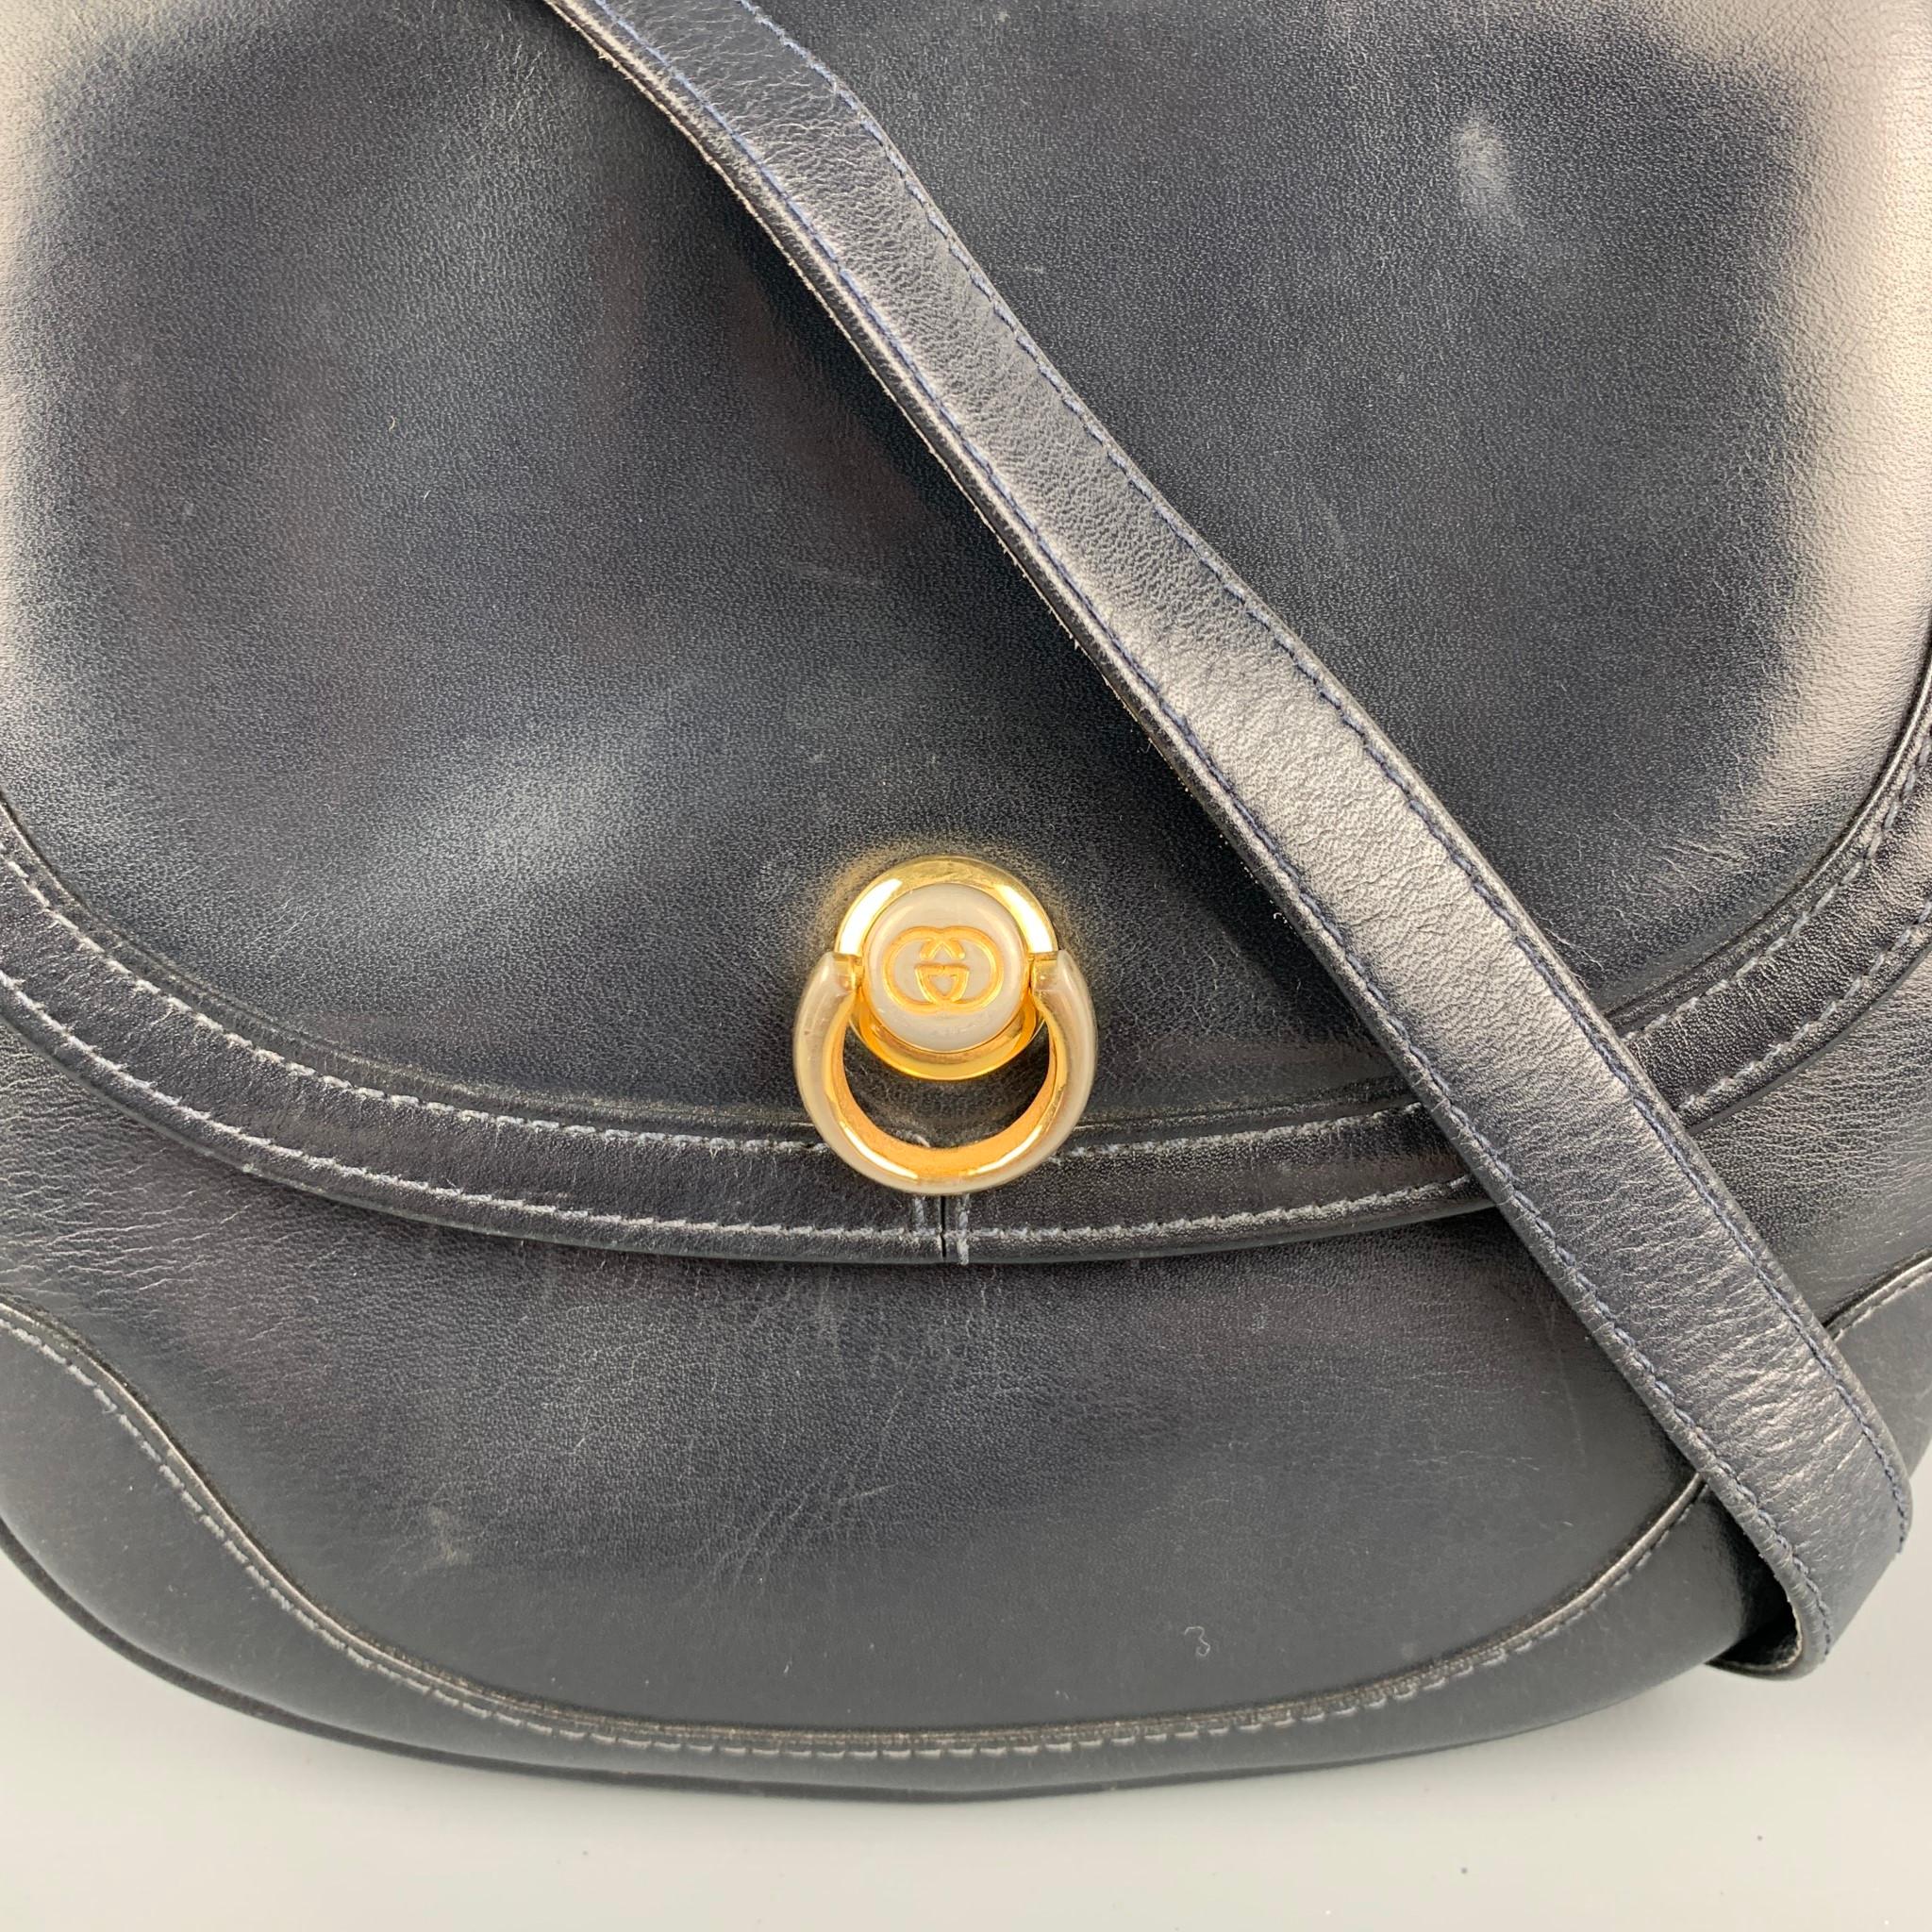 Vintage GUCCI bag comes in a black leather featuring a mini size style, gold tone hard ware, two inner department, removable shoulder strap, and a snap button closure. 

Good Pre-Owned Condition.

Measurements:

Length: 7 in.
Width: 2 in.
Height: 6